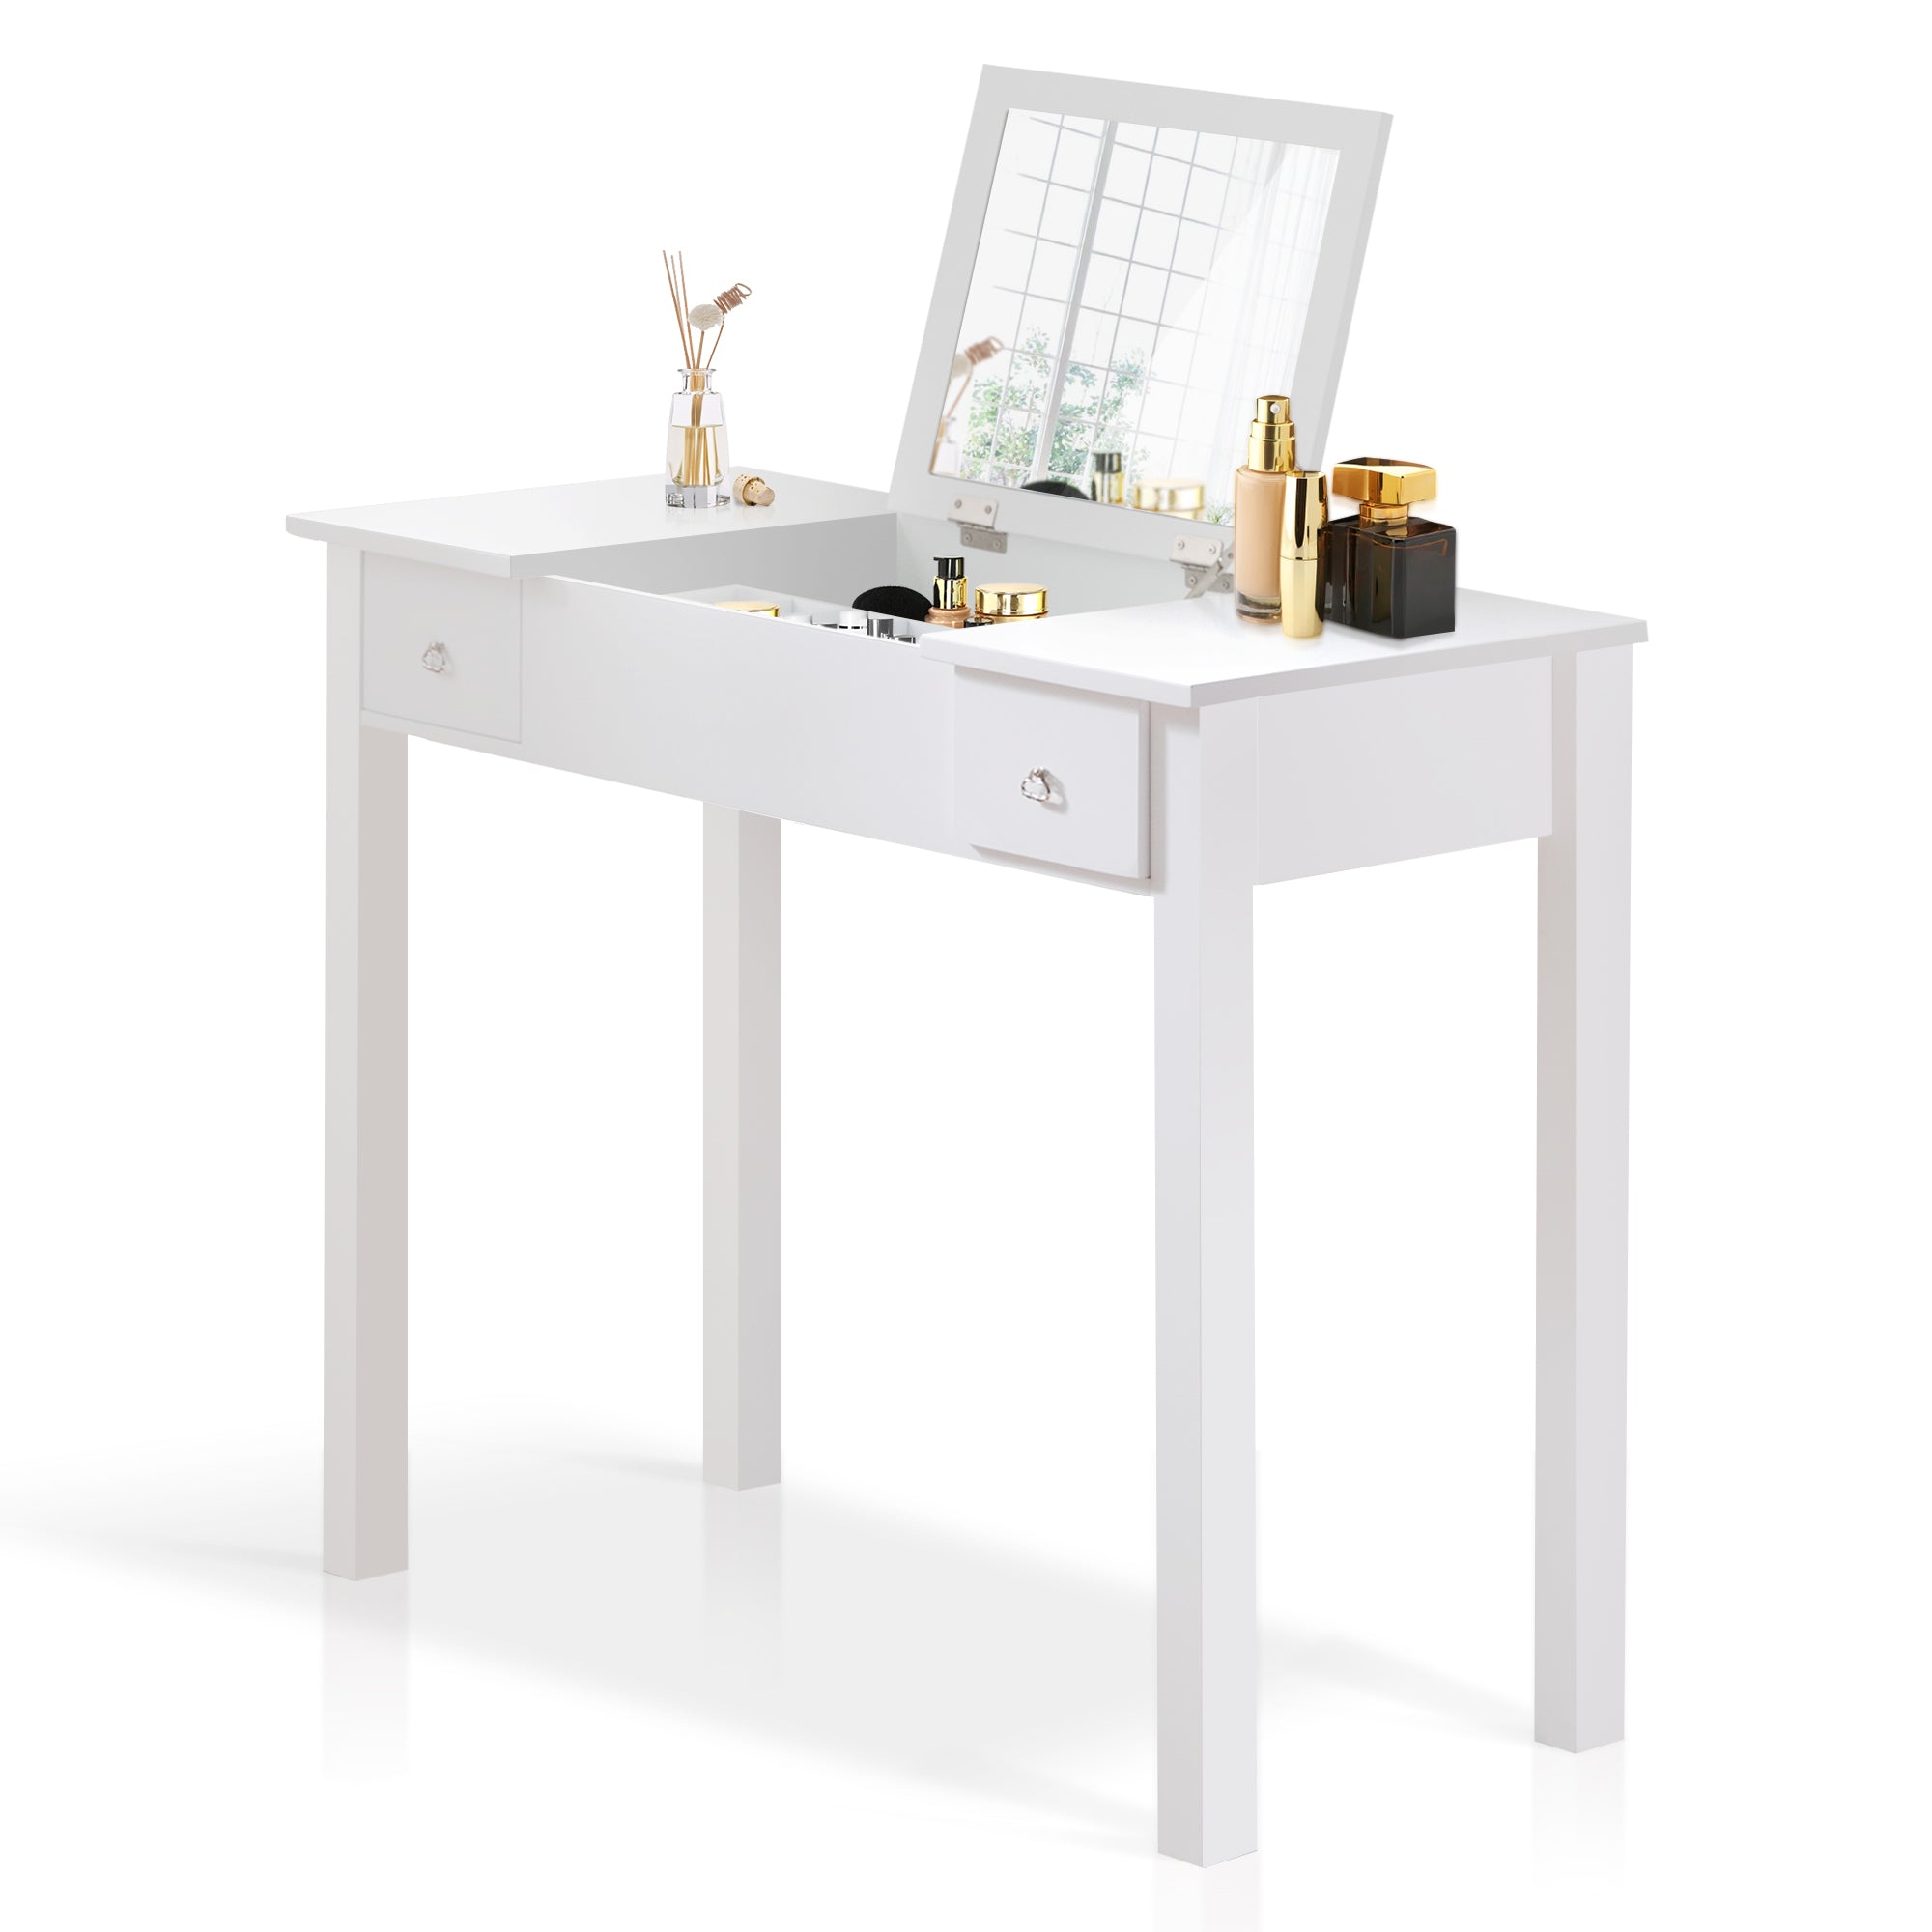 Accent White Vanity Table with Flip-Top Mirror and 2 Drawers